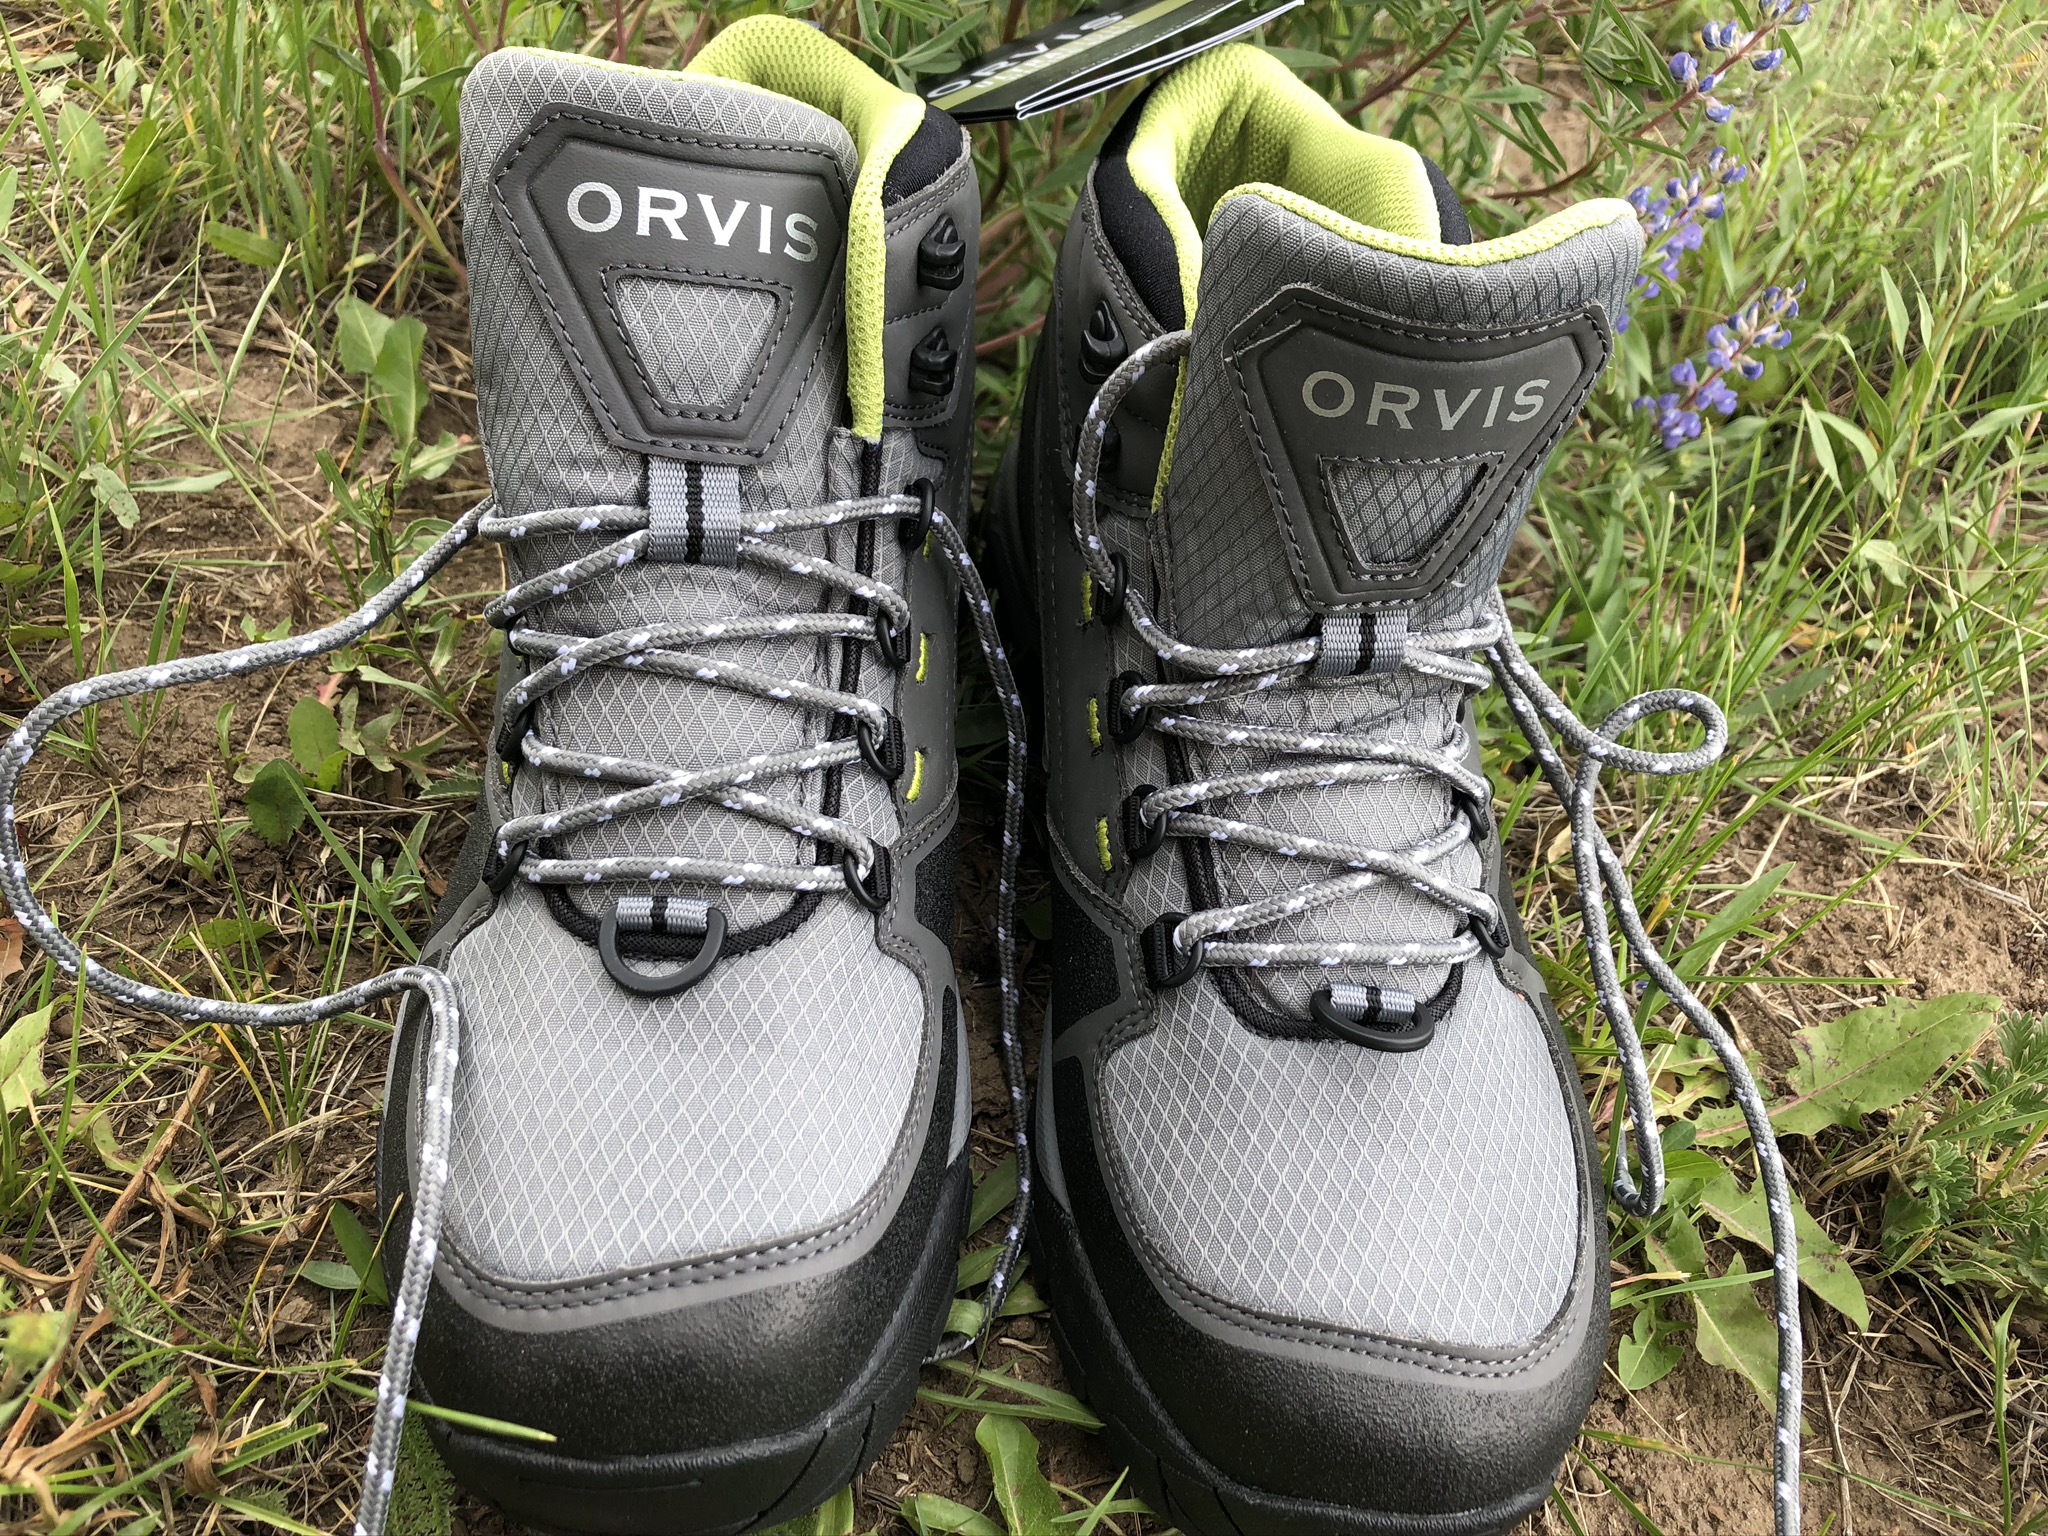 Orvis PRO Approach Wet Wading Shoes, Fishing Wading Boots